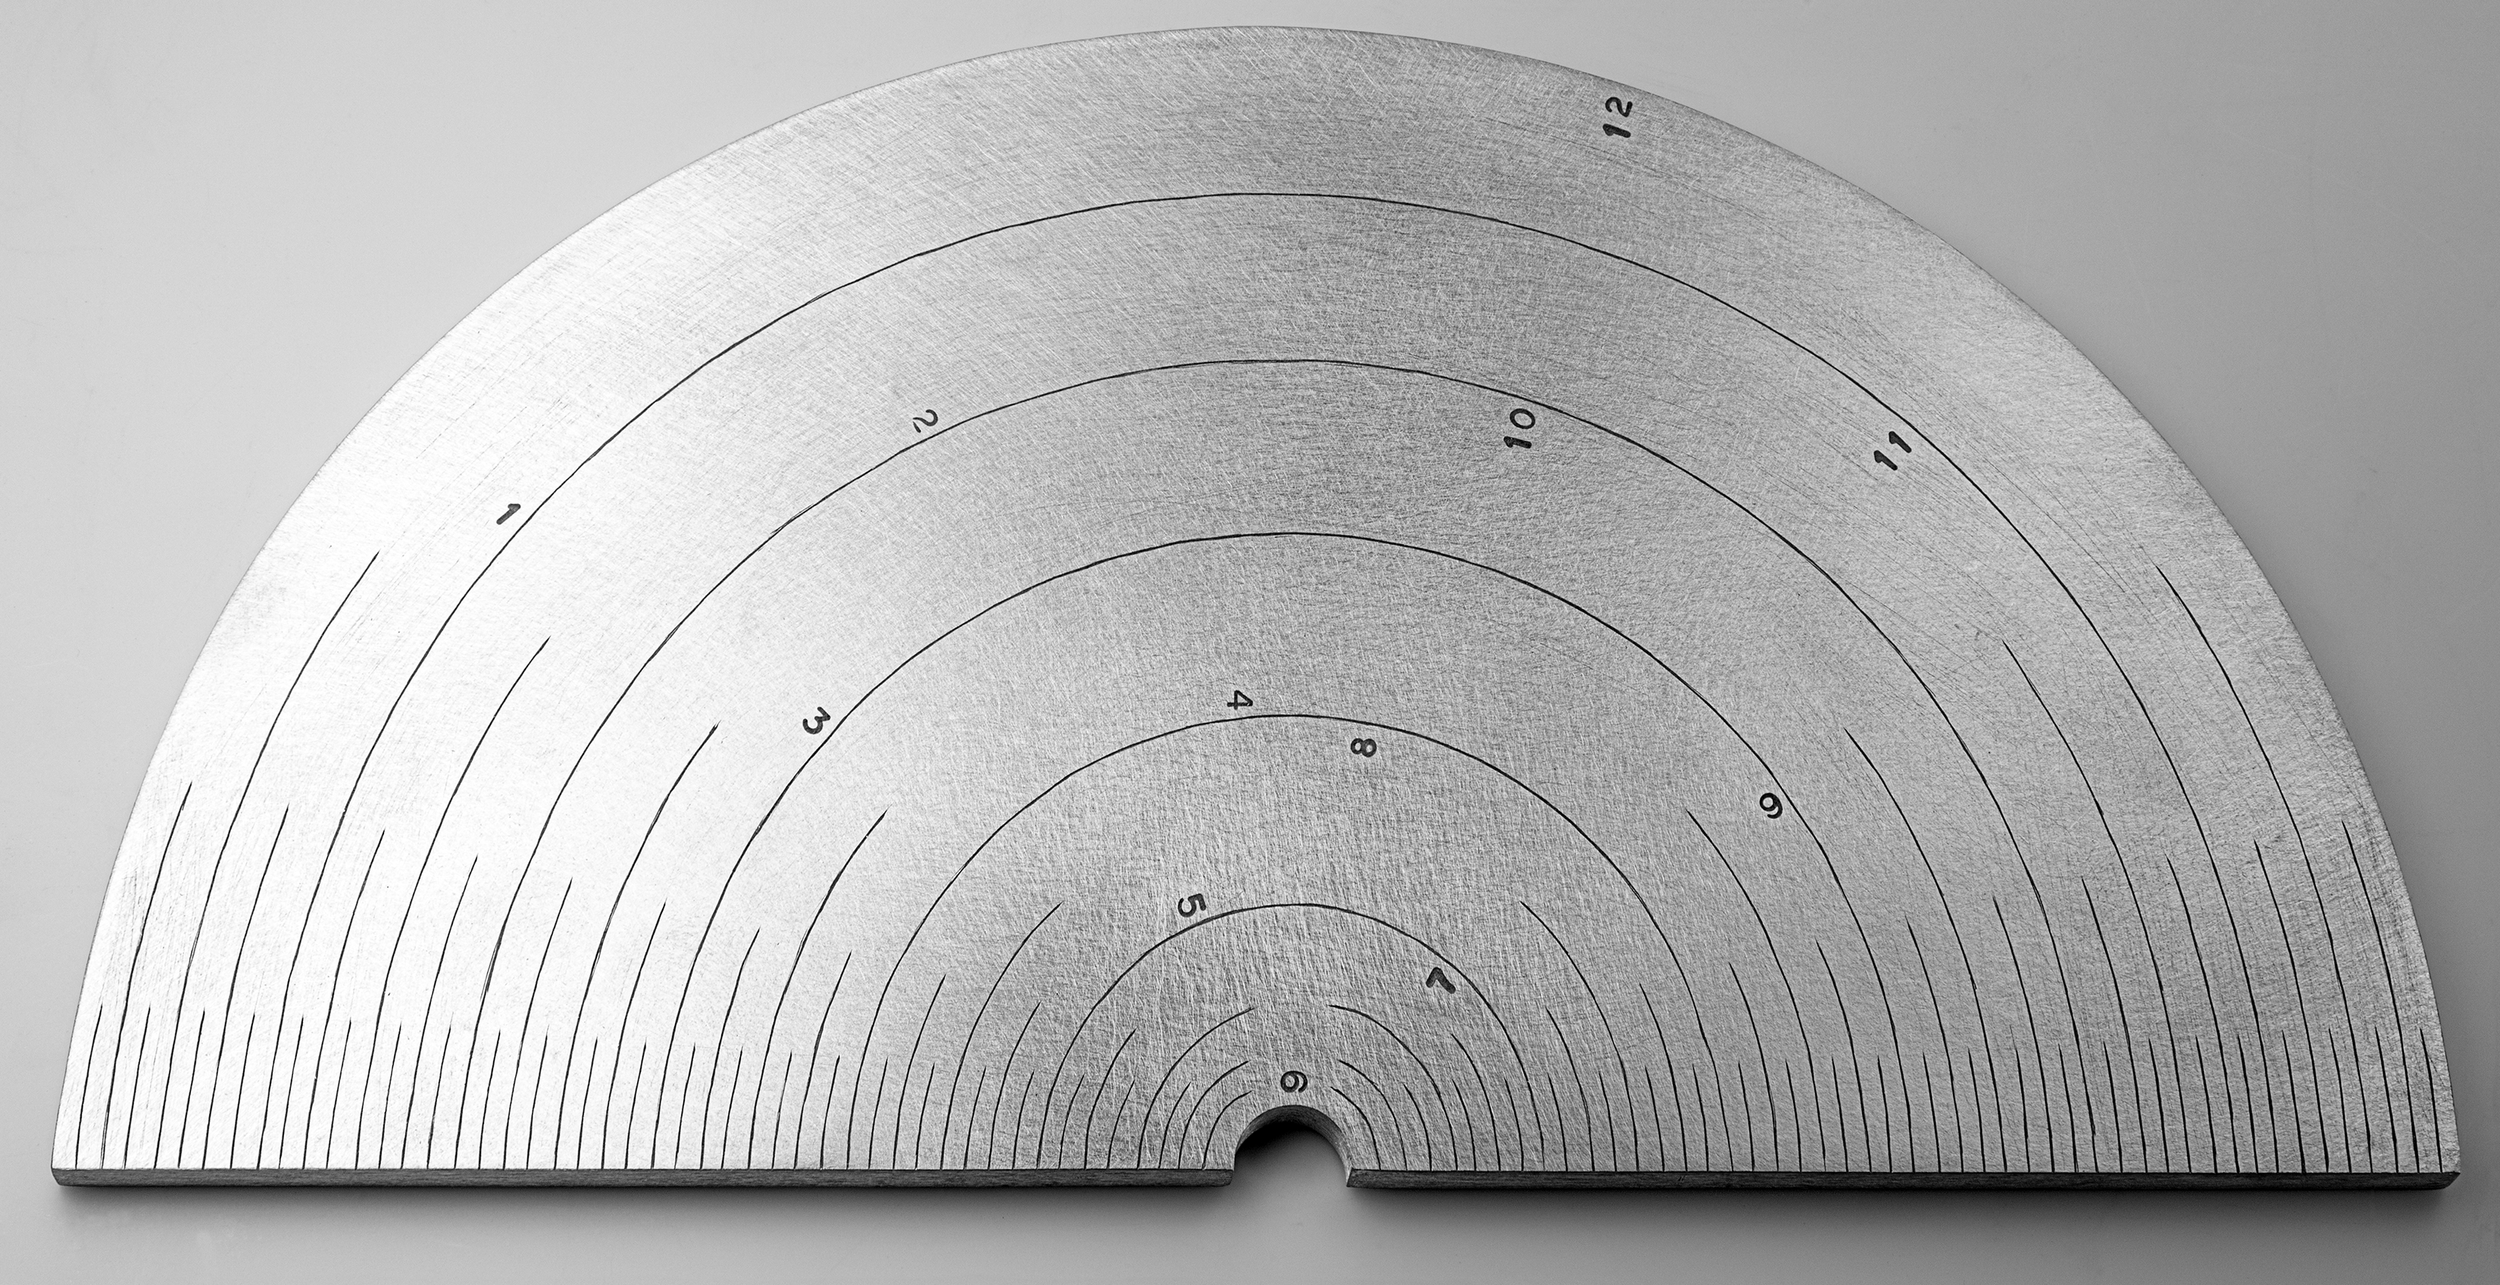 Instrument #163, hand engraved aluminum and ink, 12.375" x 6.125" x .25"